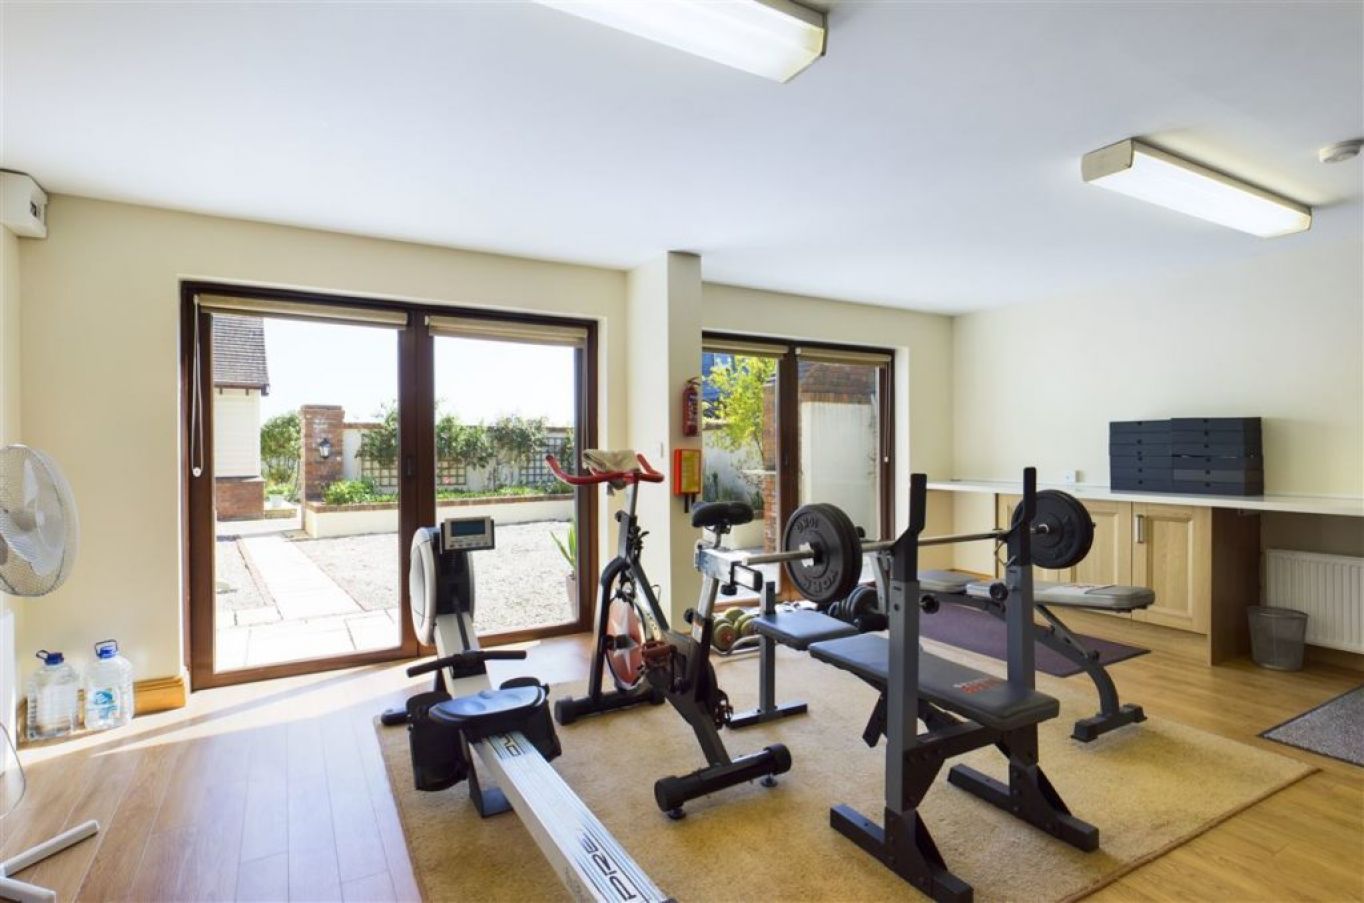 The Adjoining Converted Double Garage Has Been Equipped With A Gym. Photo: Courtesy Of Re/Max Property Specialists.